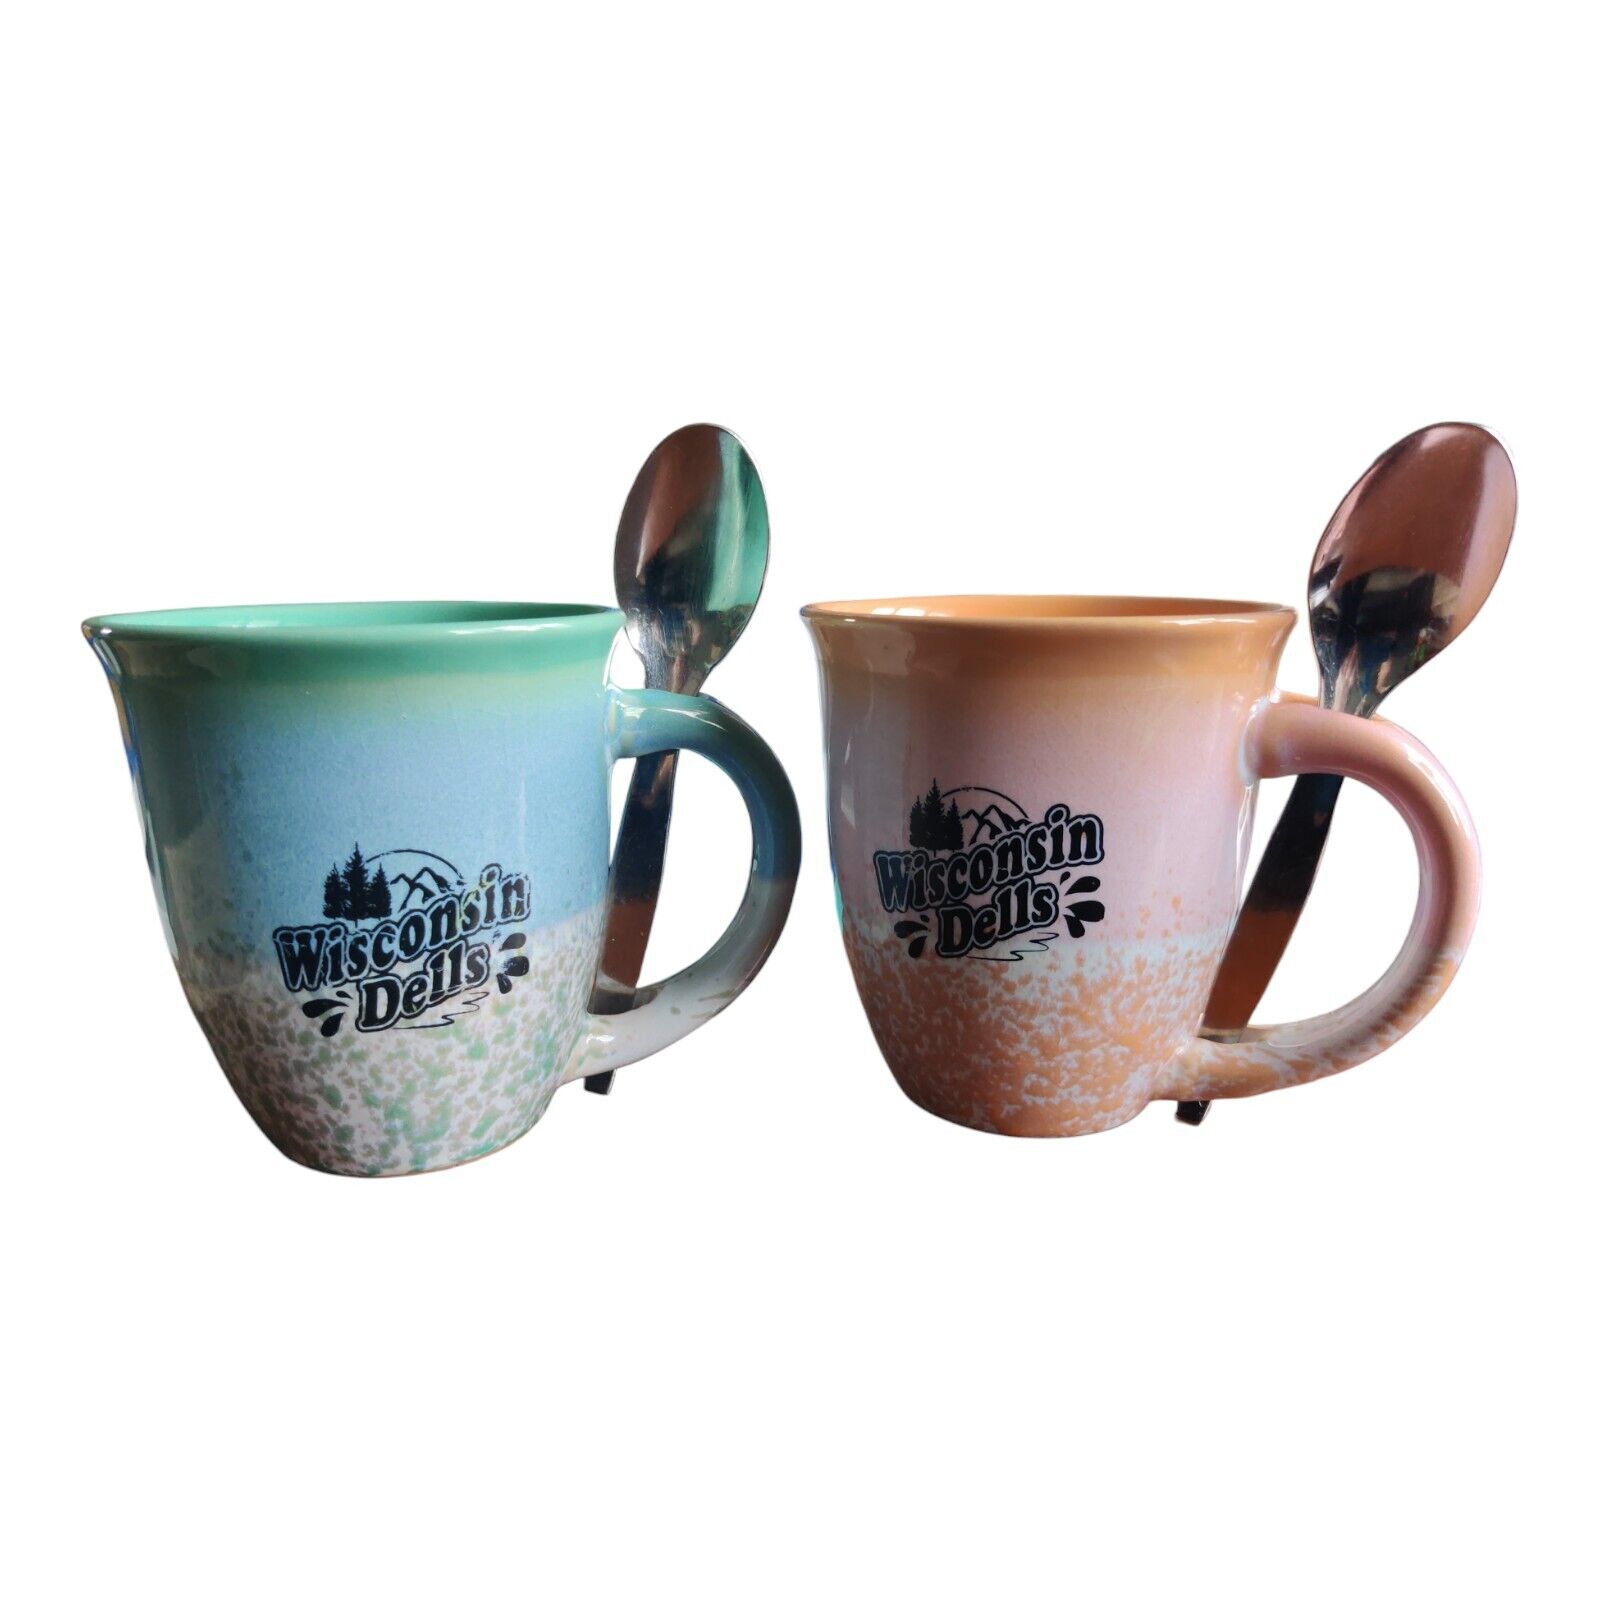 Pair 2 Wisconsin Dells 16 oz Coffee Cup Holds Spoon 